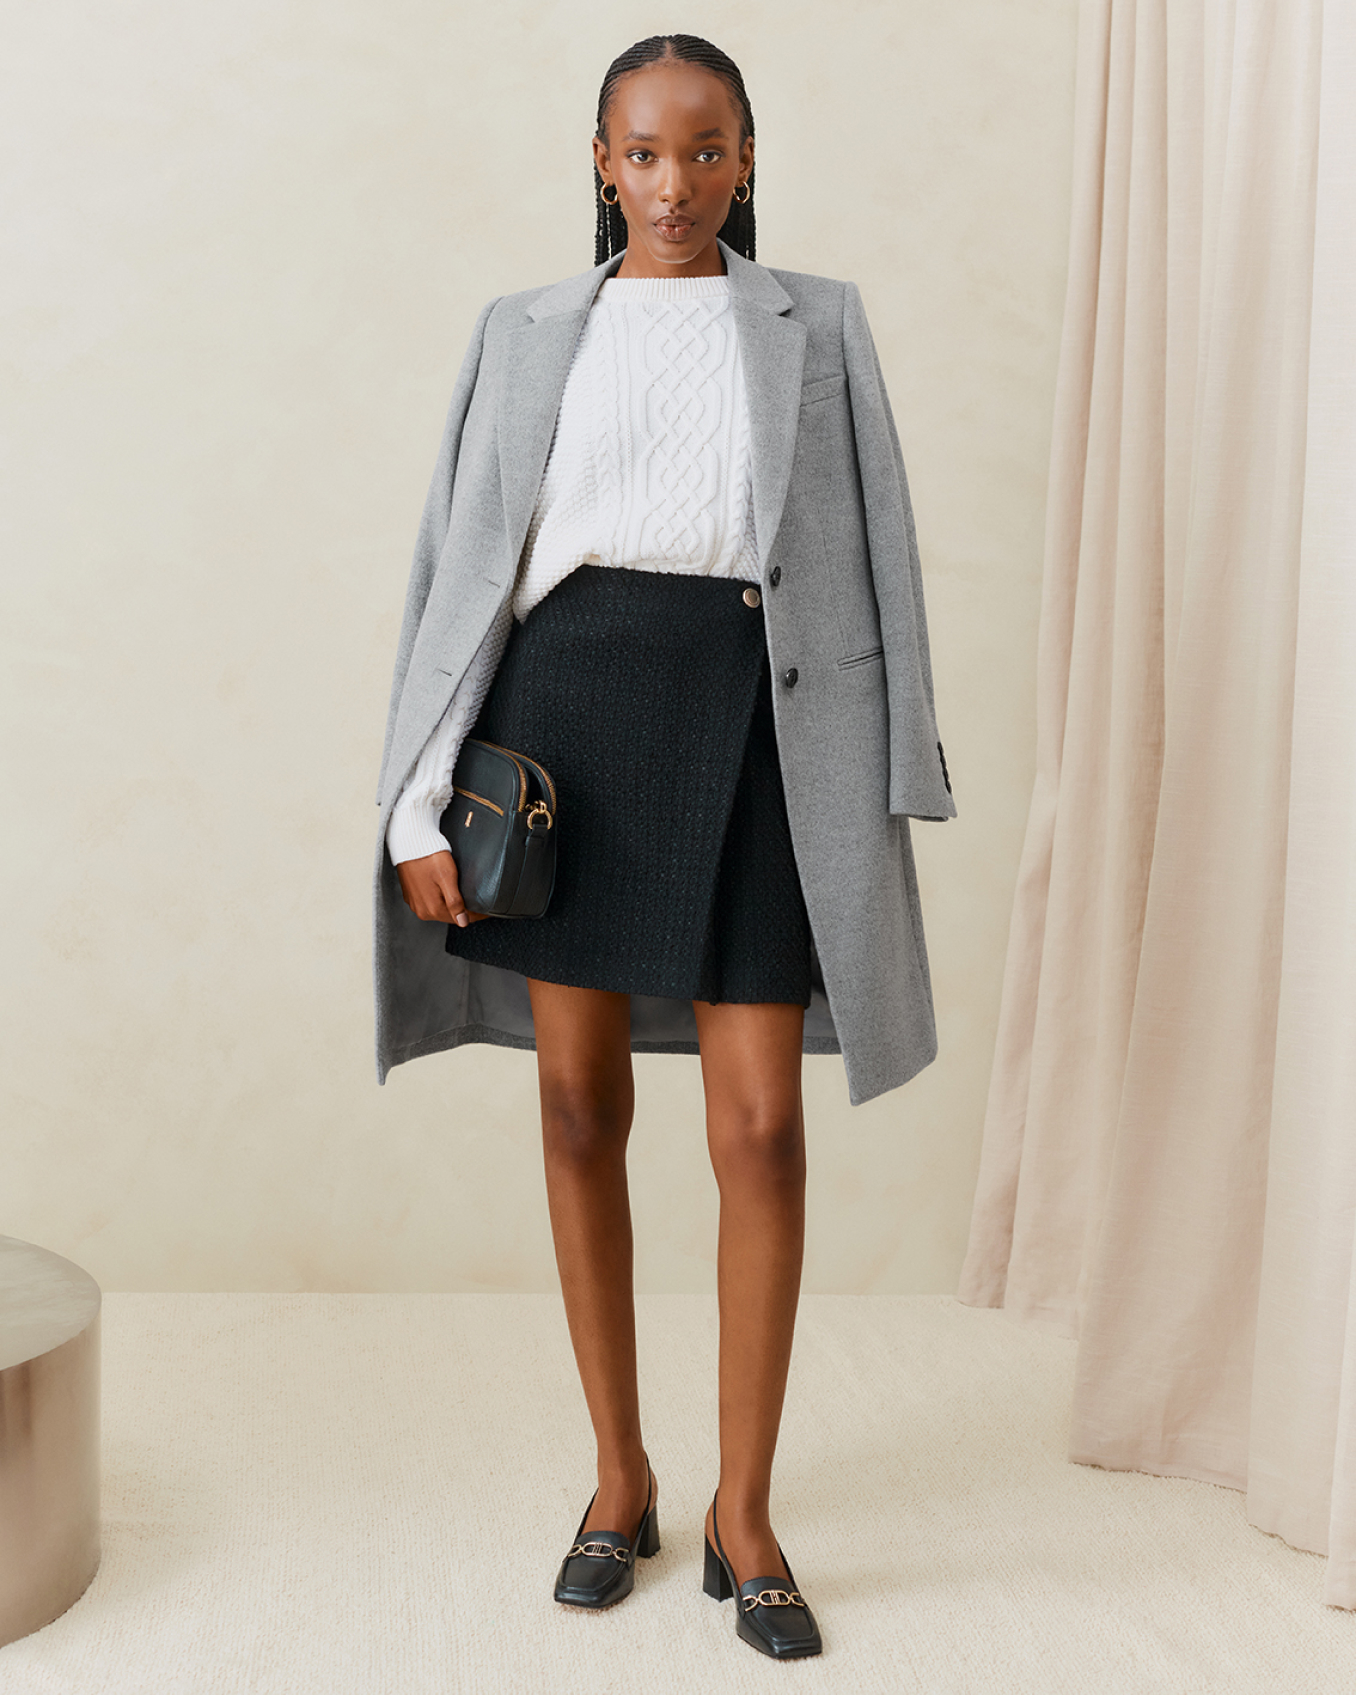 Hobbs model wears a grey tailored coat with a jumper and skirt